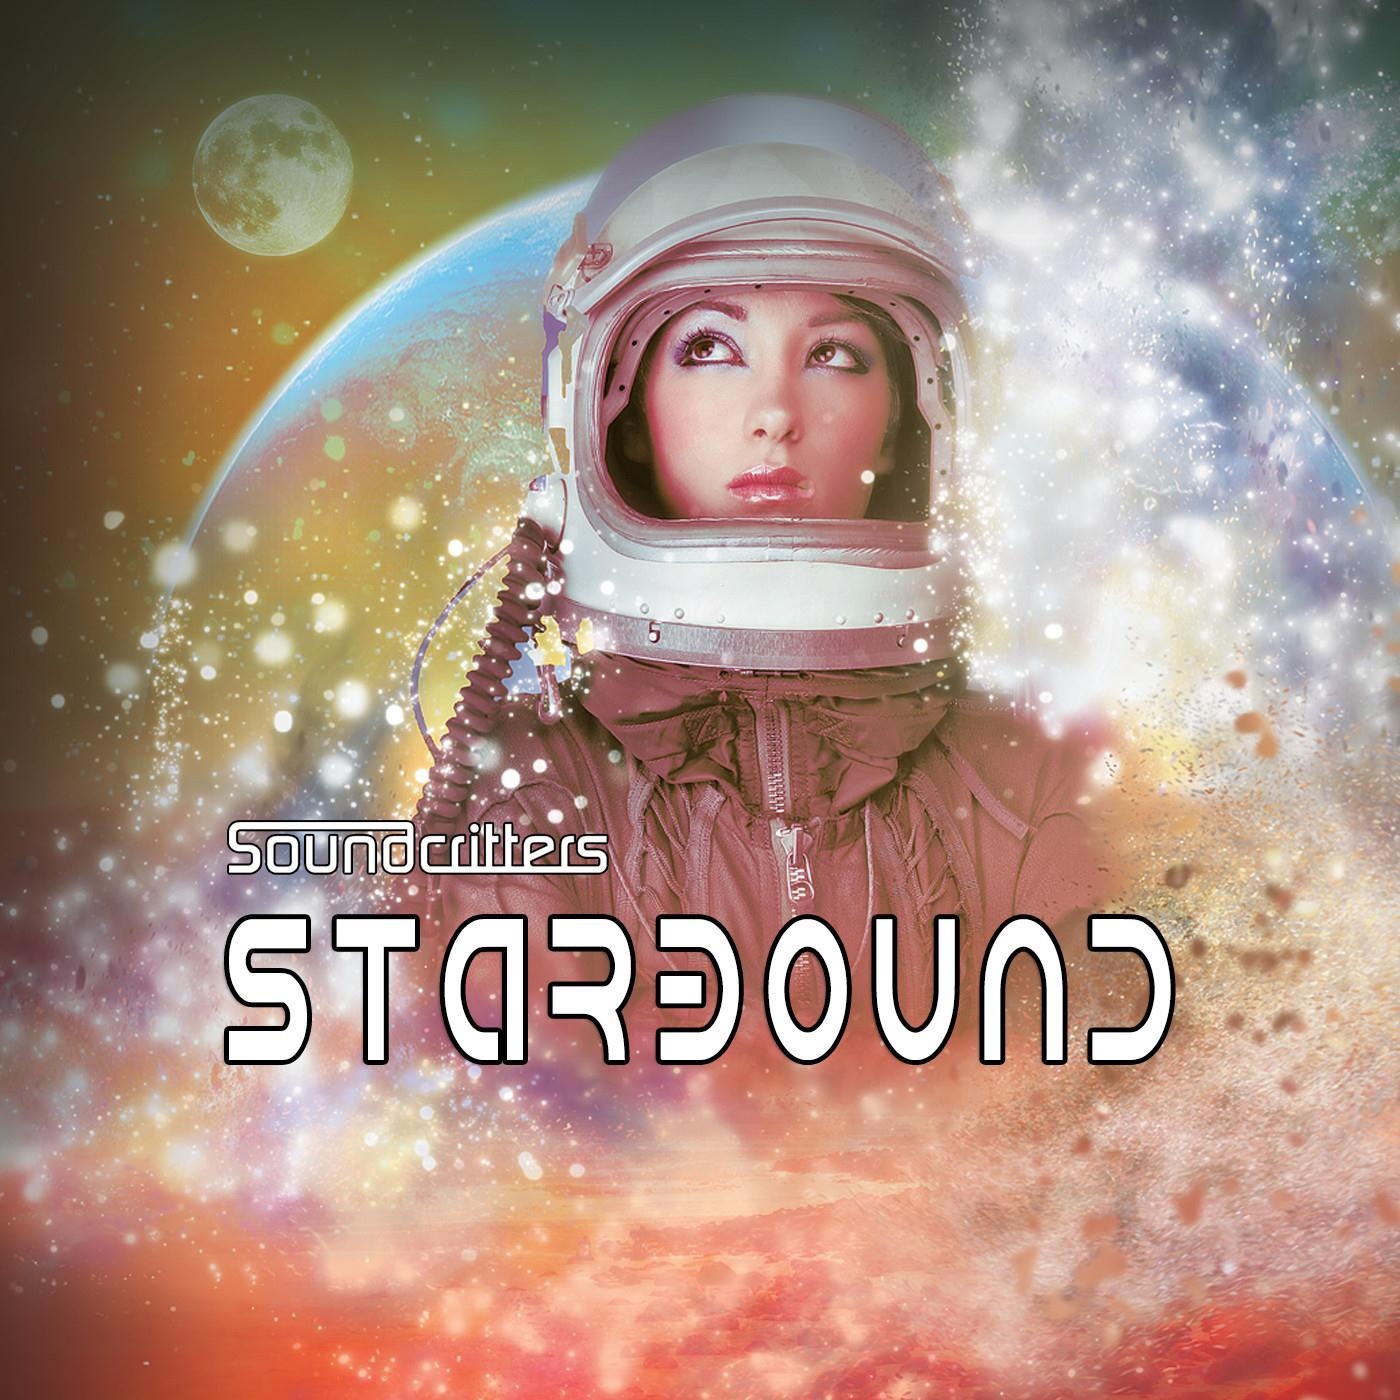 Soundcritters: Starbound